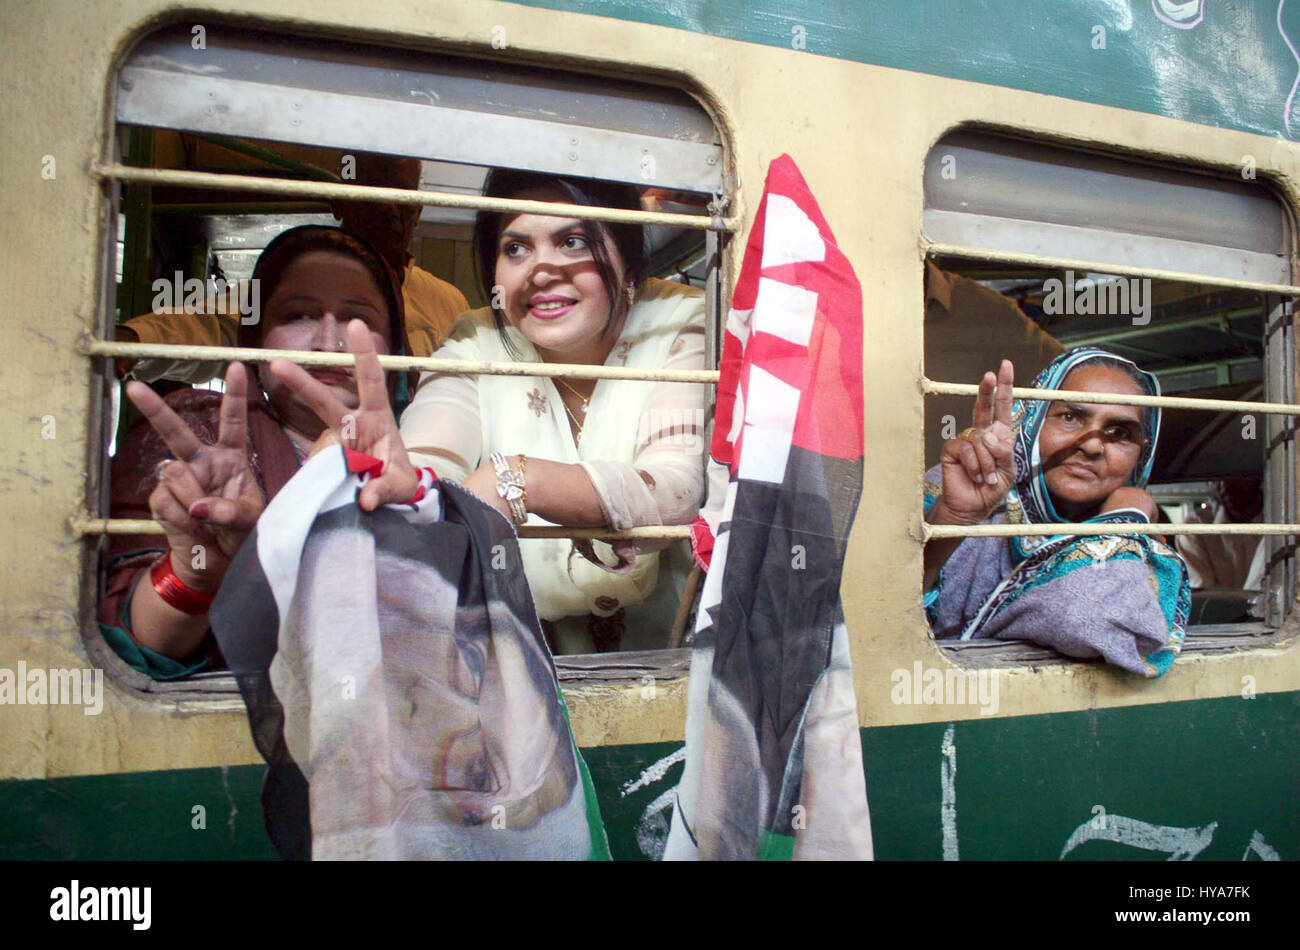 Activists of Peoples Party (PPP) chant slogans as they are leaving for Garhi Khuda Bux before their departure to attend the Death Anniversary ceremony of PPP Founder, Zulfiqar Ali Bhutto, at railway station in Lahore on Monday, April 03, 2017. Stock Photo